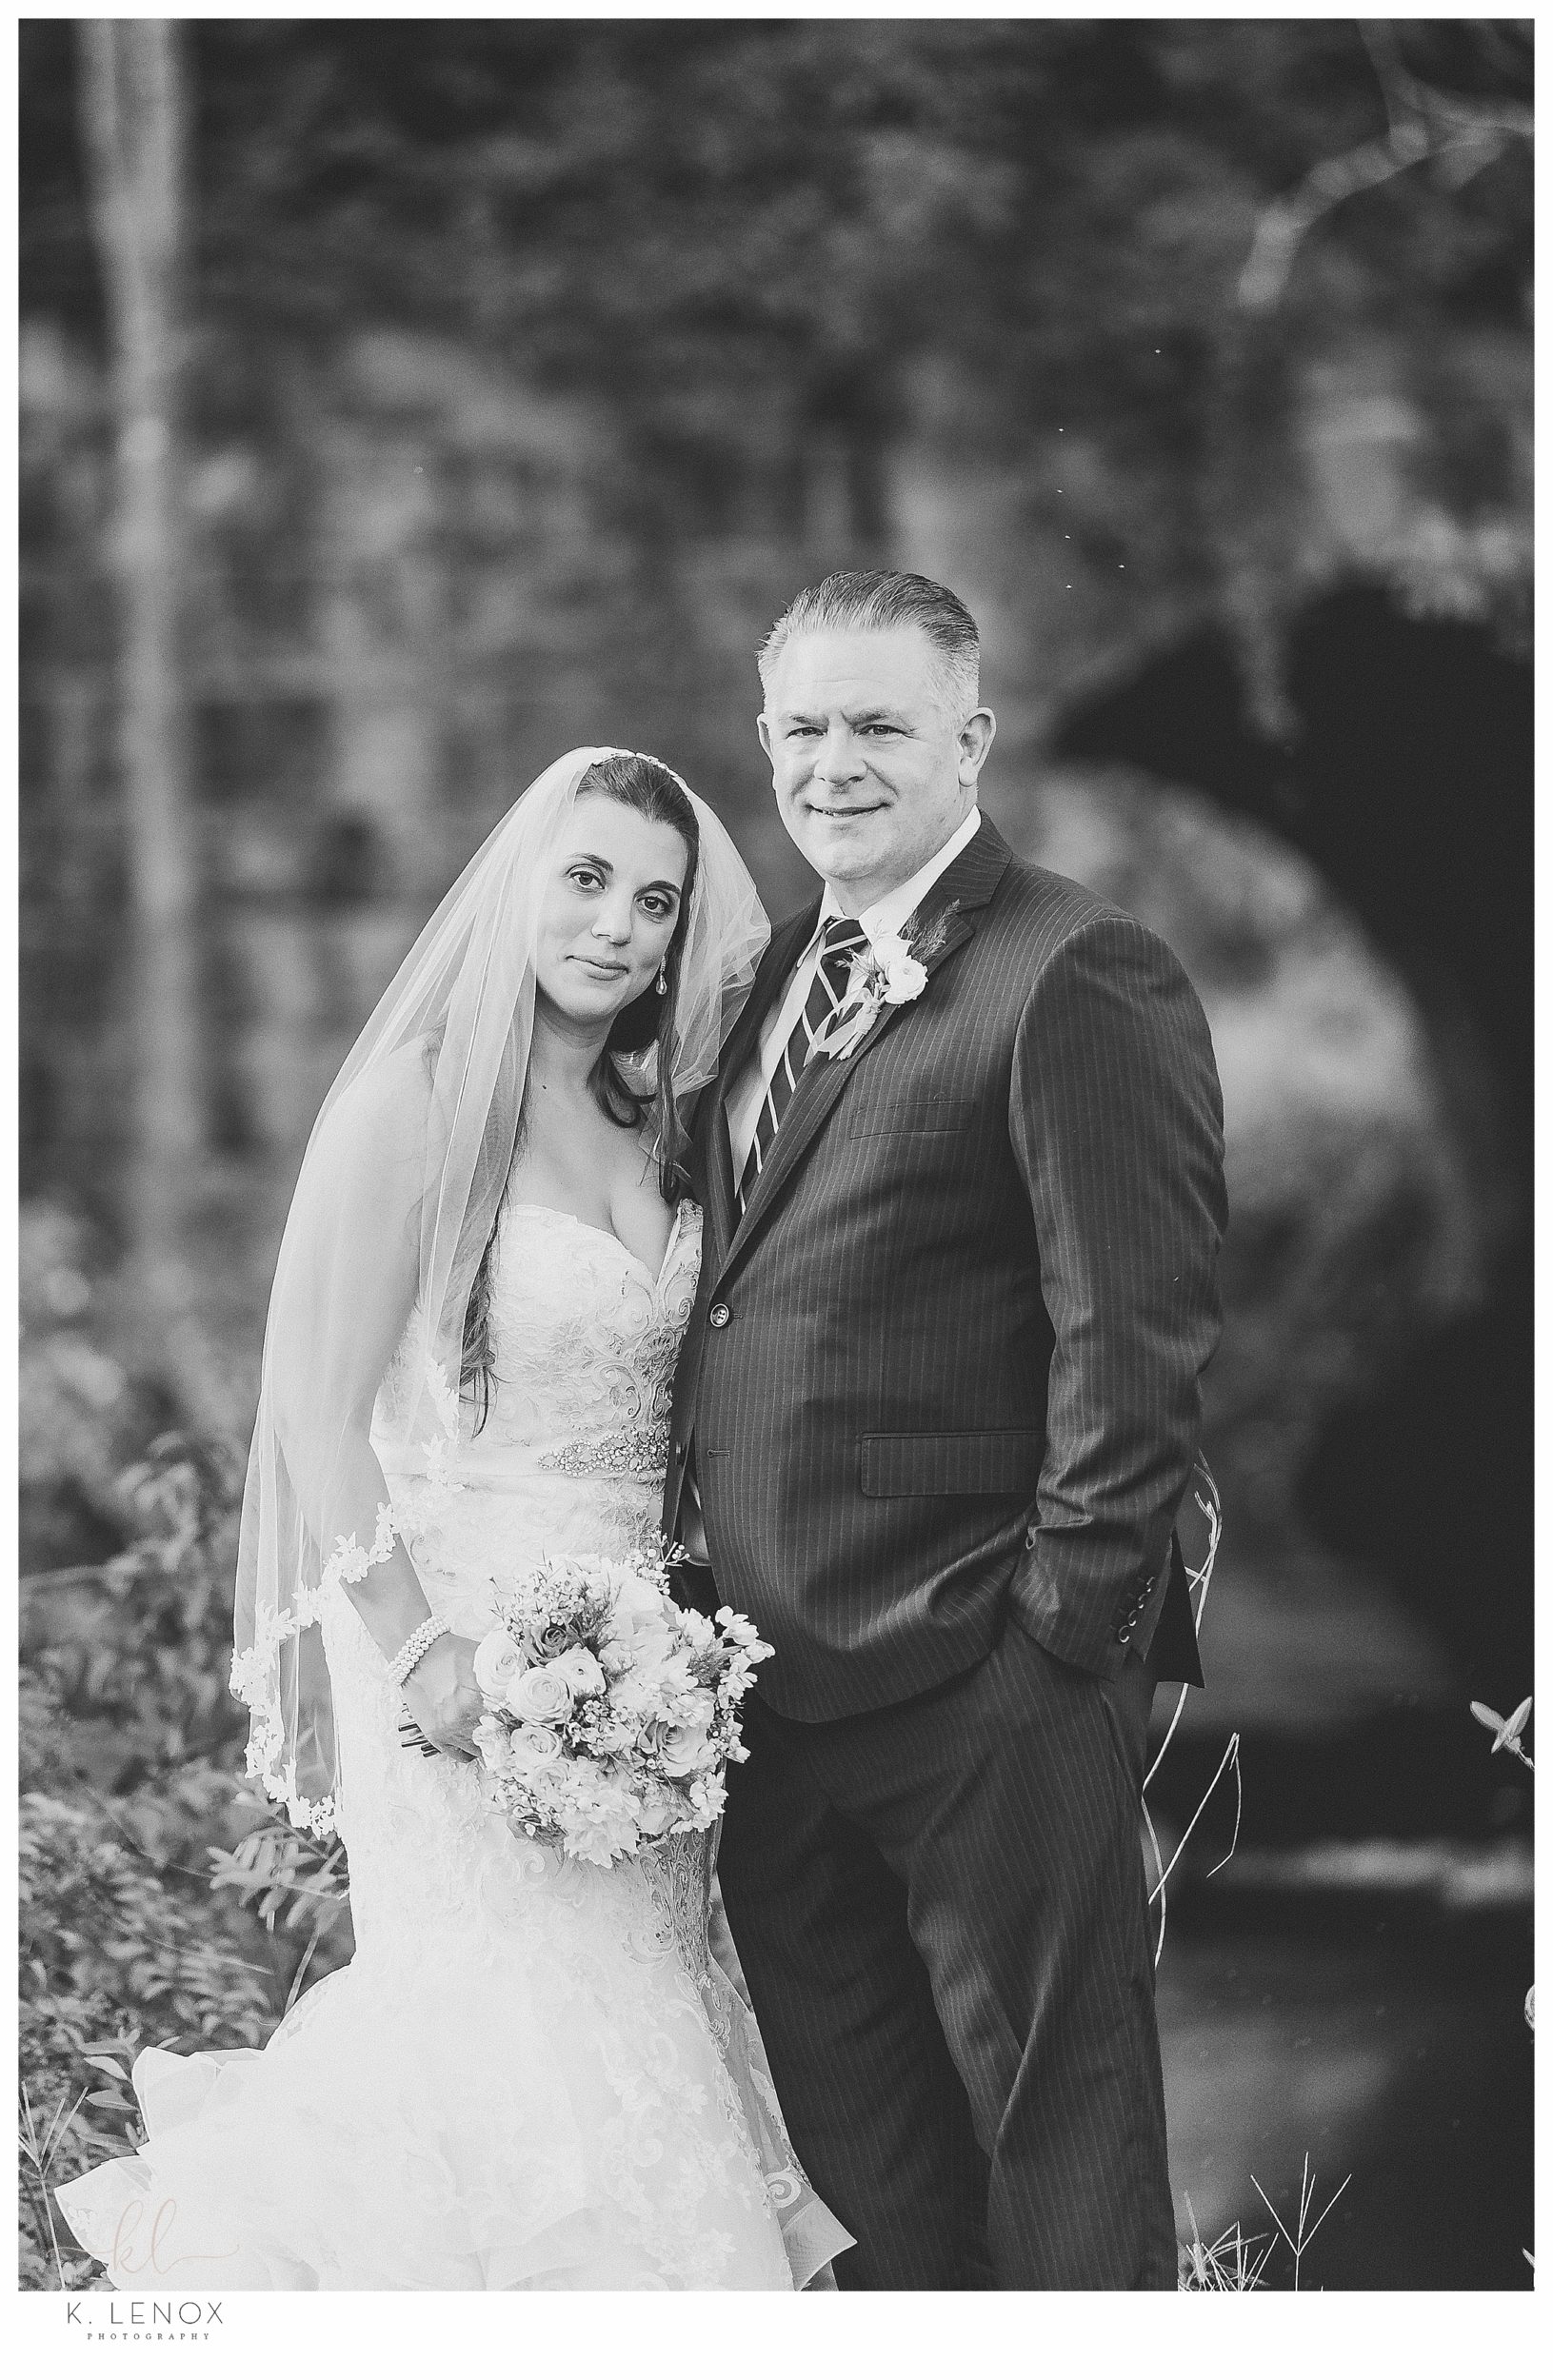 Black and White portrait of a Bride and Groom Wedding at the Keene Country Club
